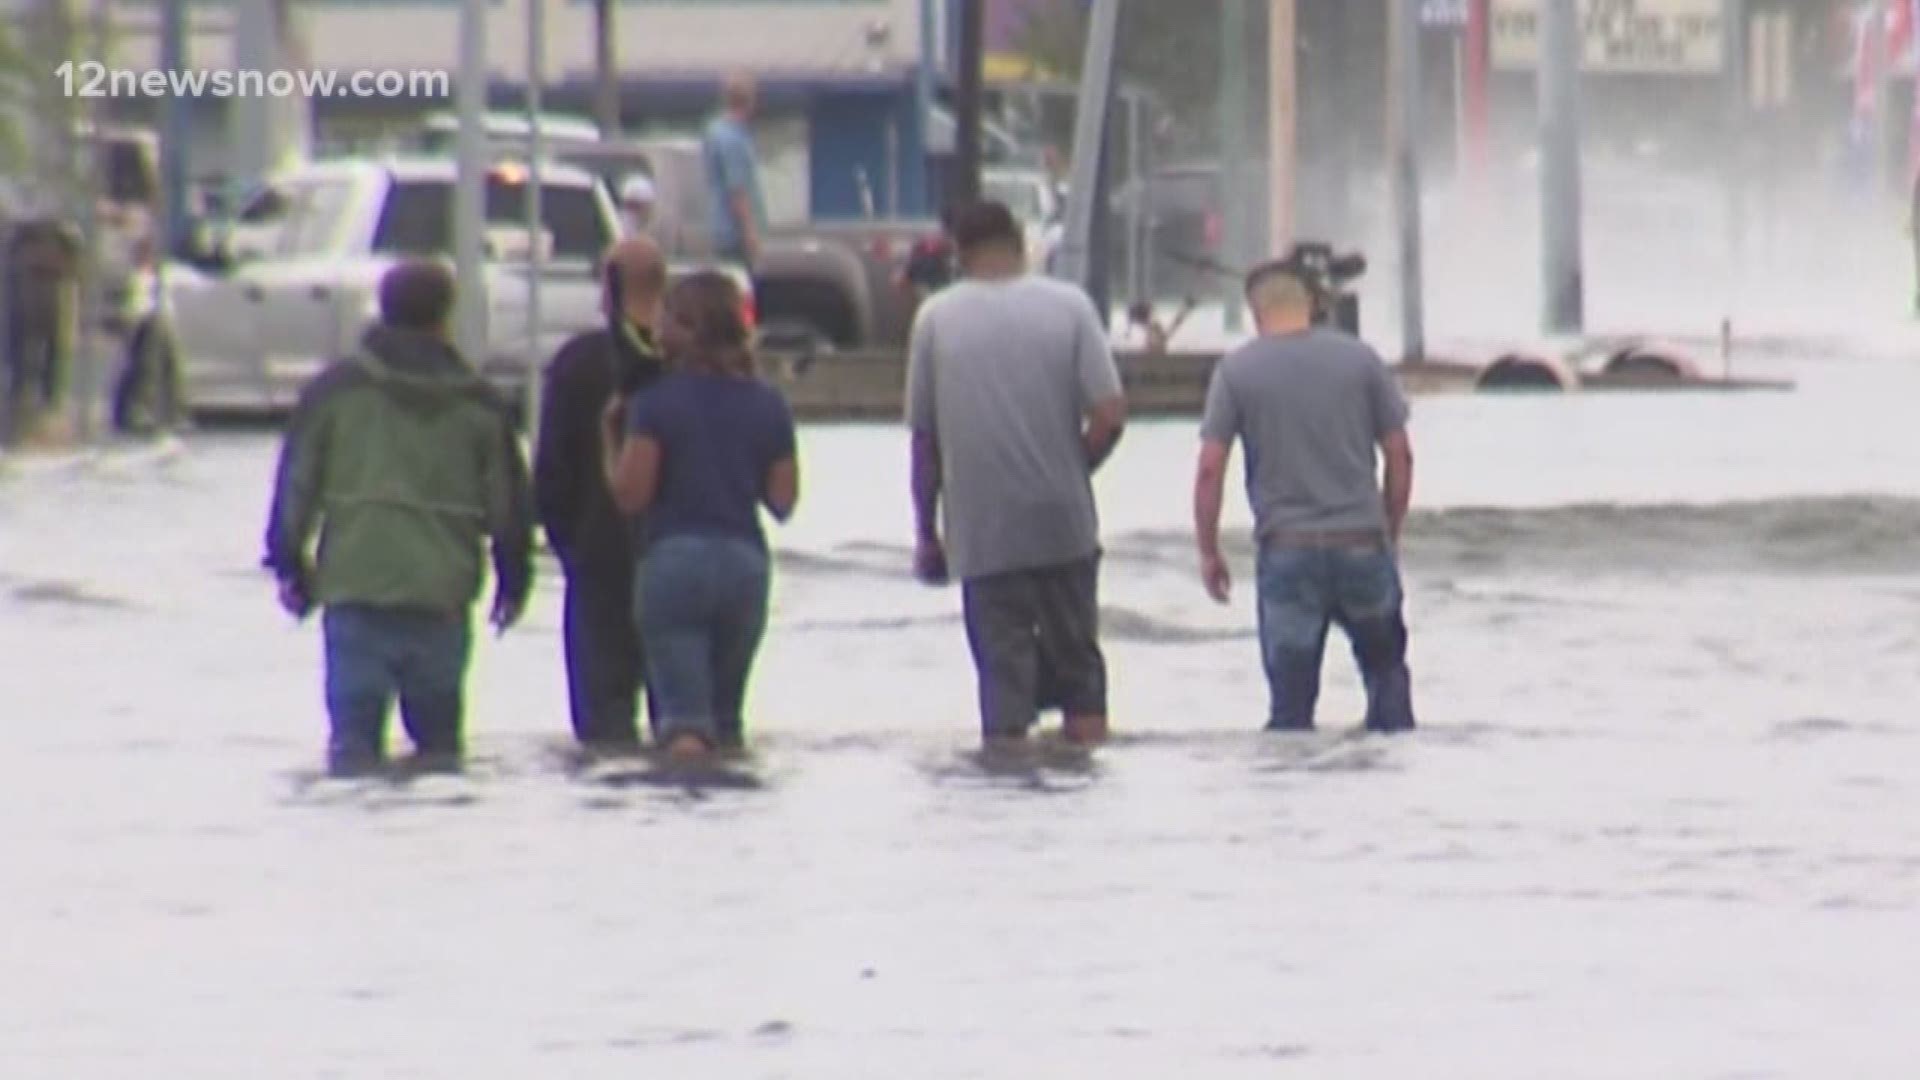 More than 30 agencies will be available to answer questions and sign flood victims up for help.